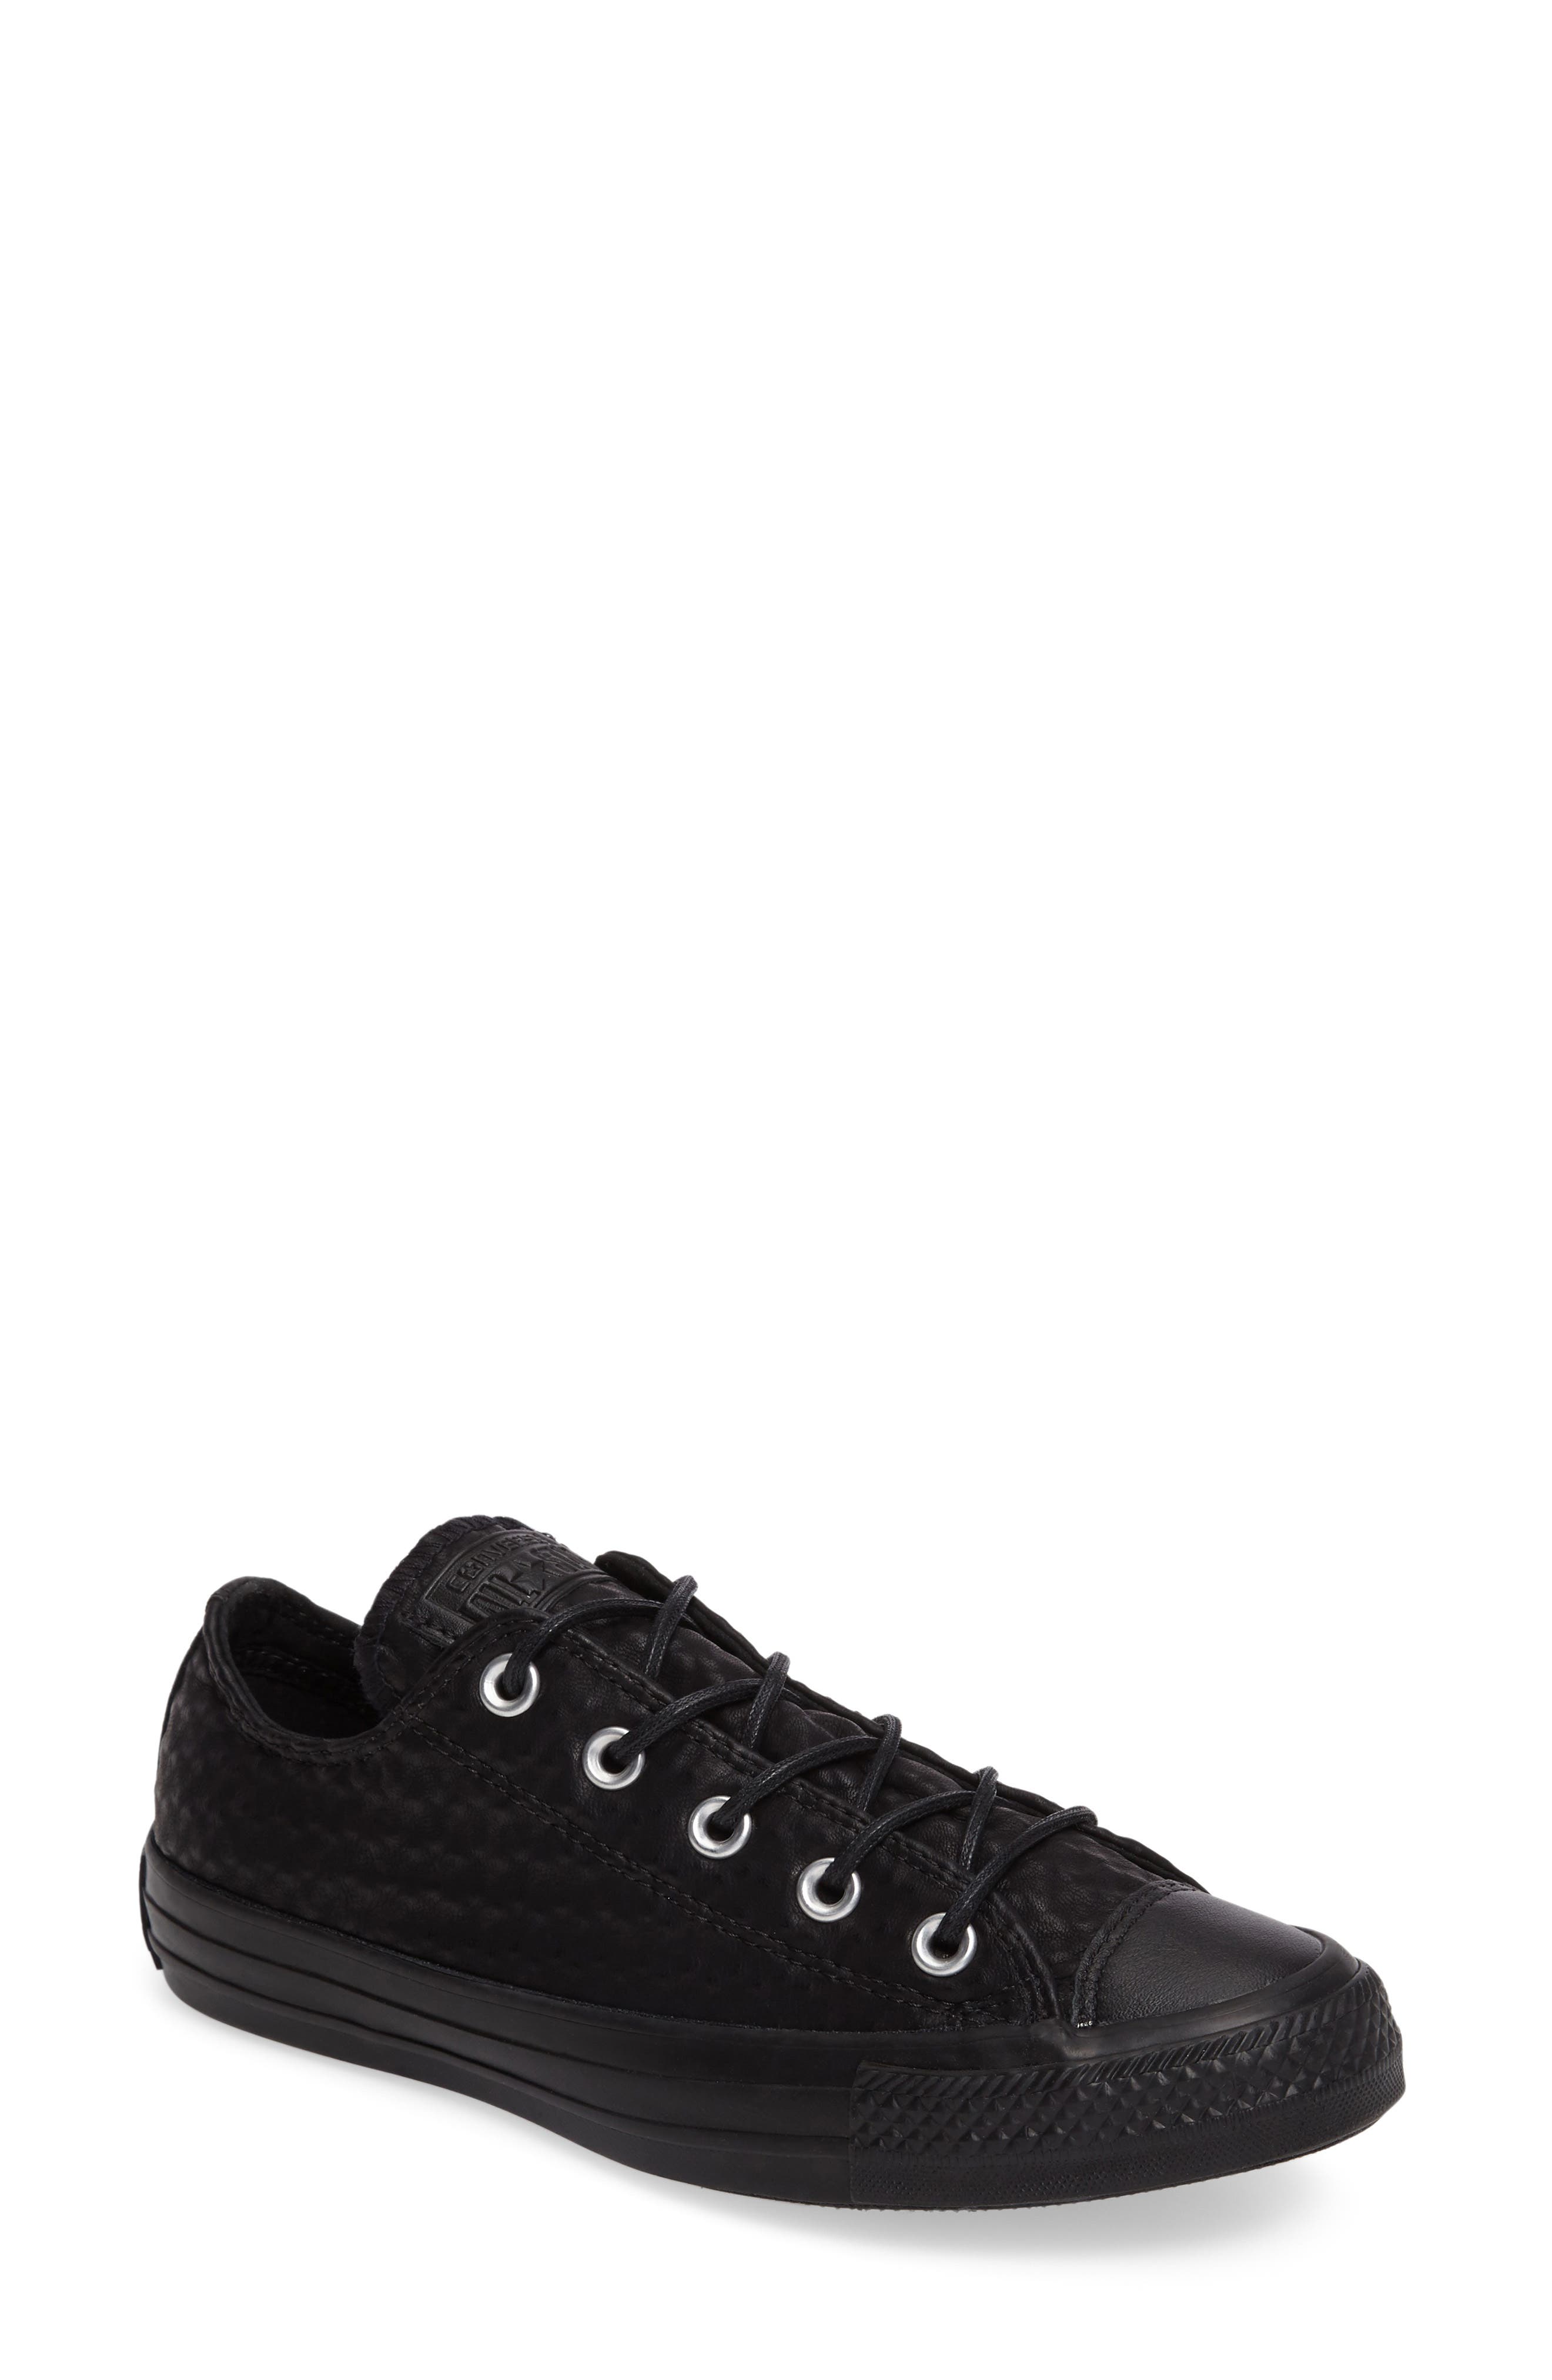 converse all star ox leather womens